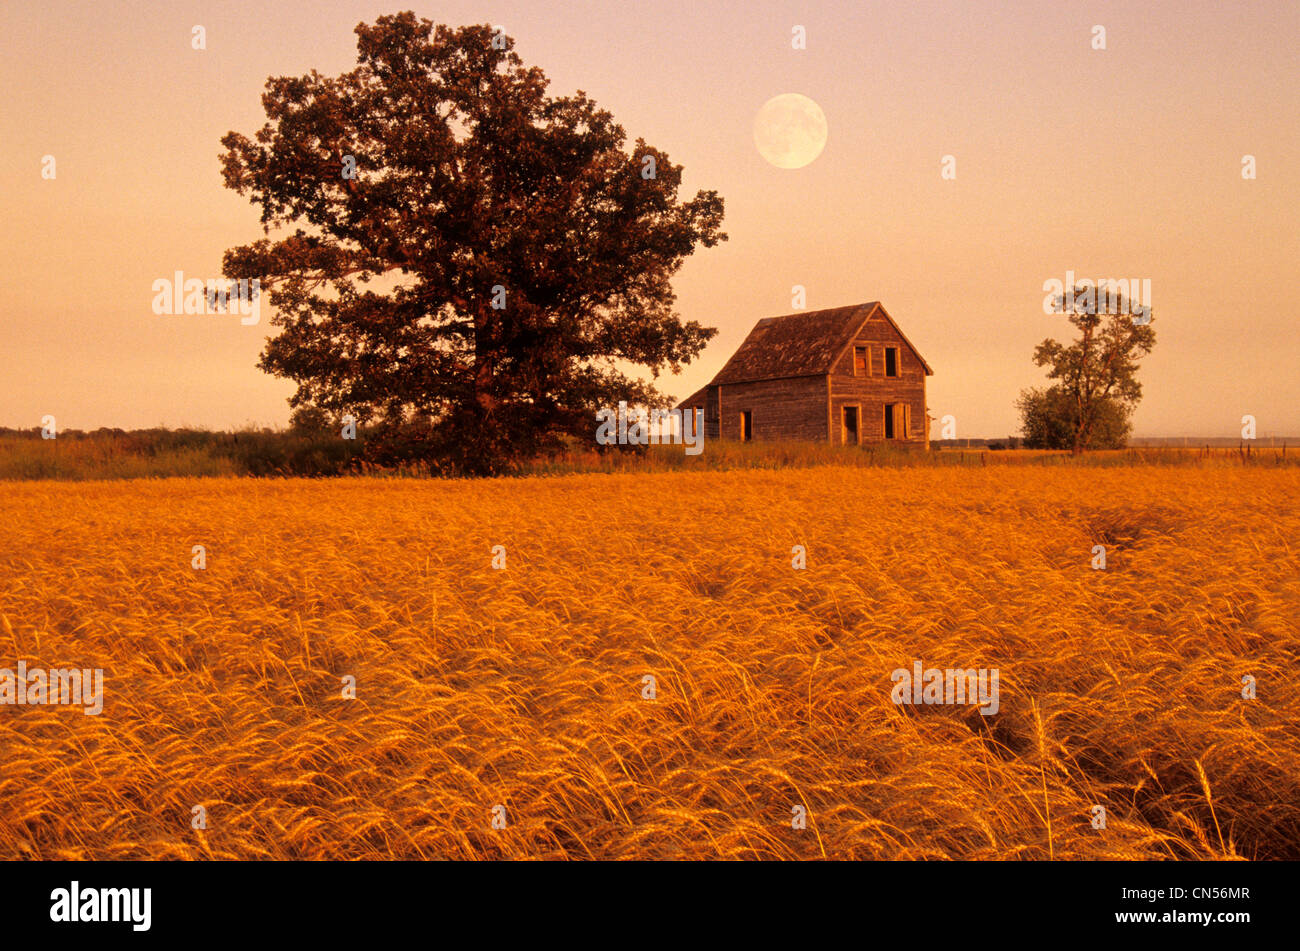 Mature Winter Wheat with Old House and Oak Tree in the background, Beausejour, Manitoba Stock Photo